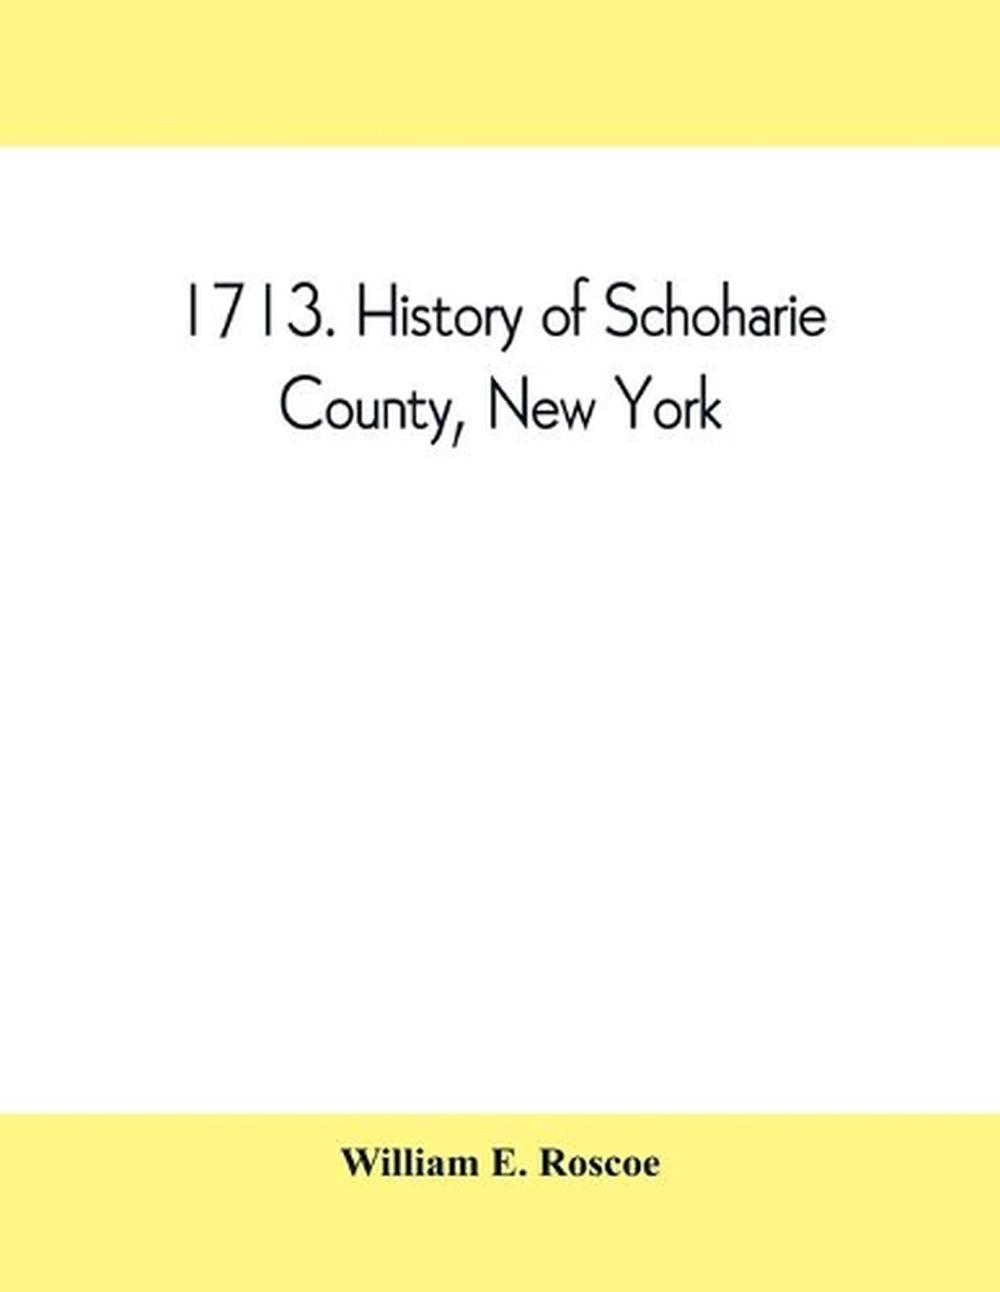 1713. History of Schoharie County, New York, with illustrations and ...